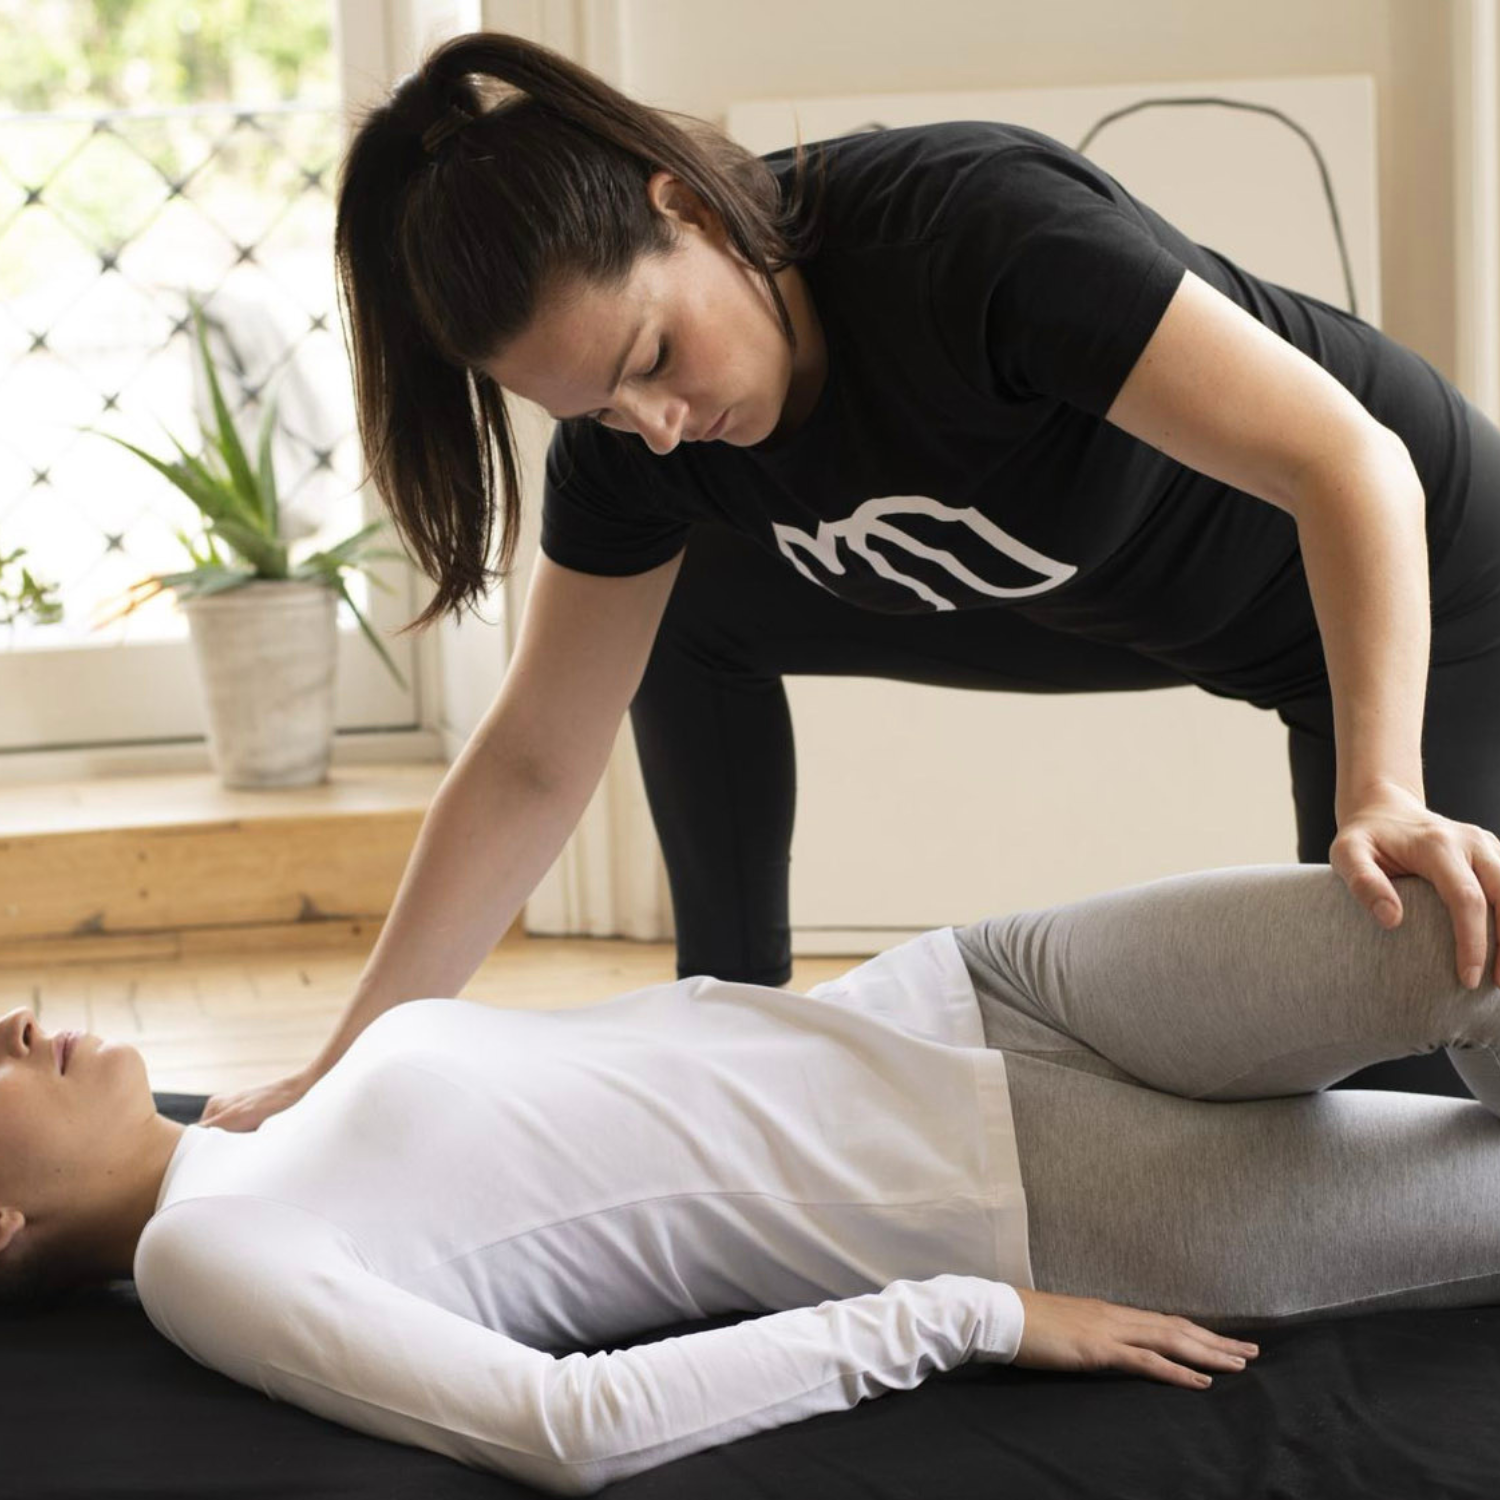 Therapist performs side body stretch during an at home assisted stretching session